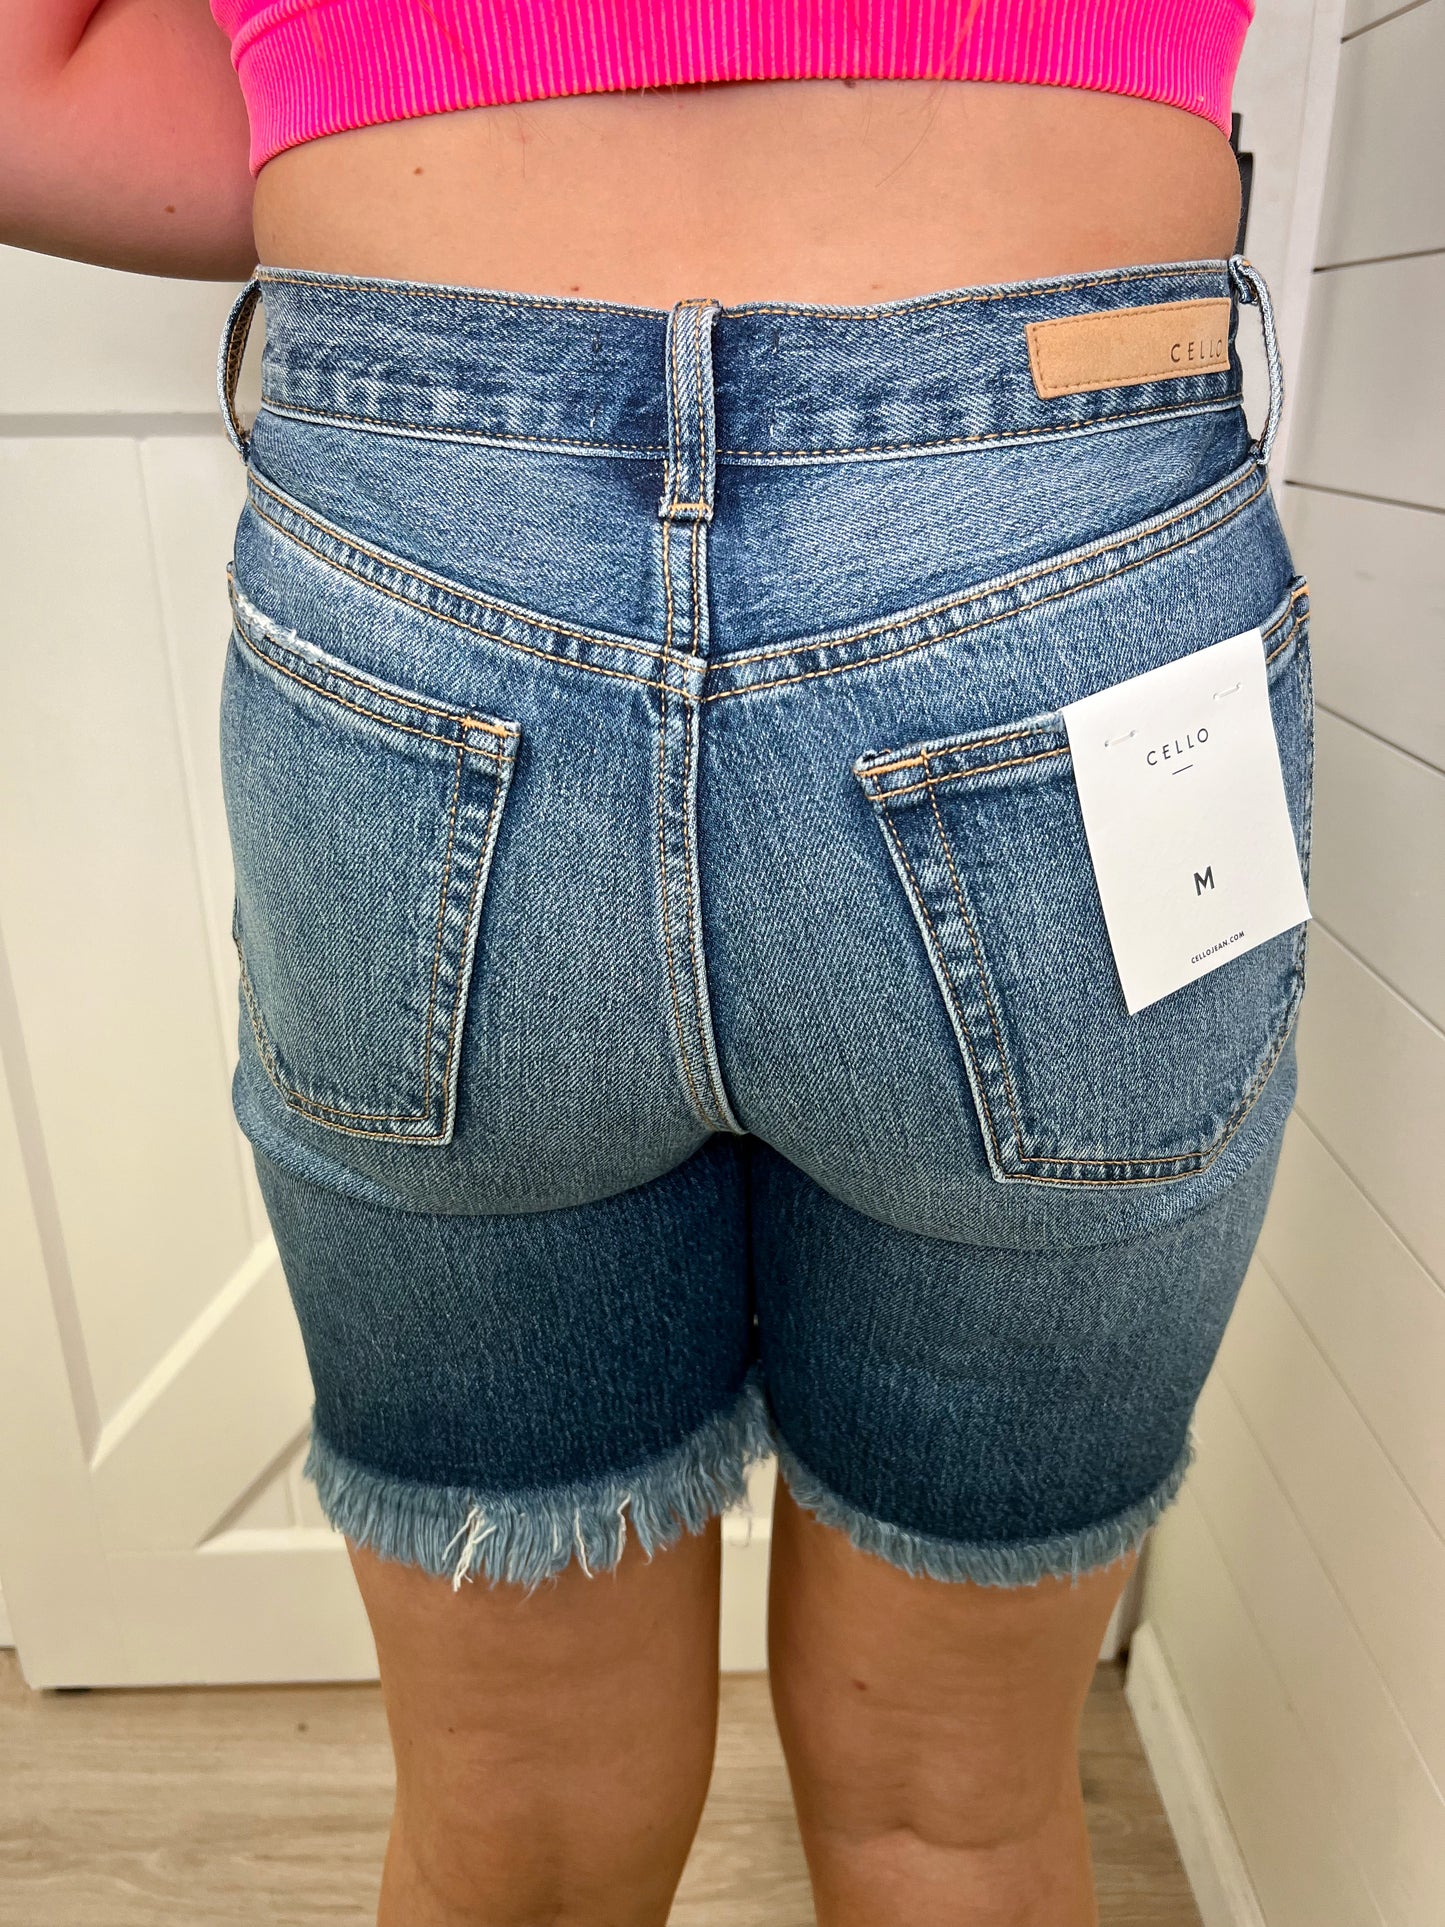 Claudie High Rise Frayed Hem Bermuda Shorts-Shorts-cello-09/06/23, 1st md, 2nd md, 8/09/23 md, FAVES, Max Retail, ST 99-The Twisted Chandelier